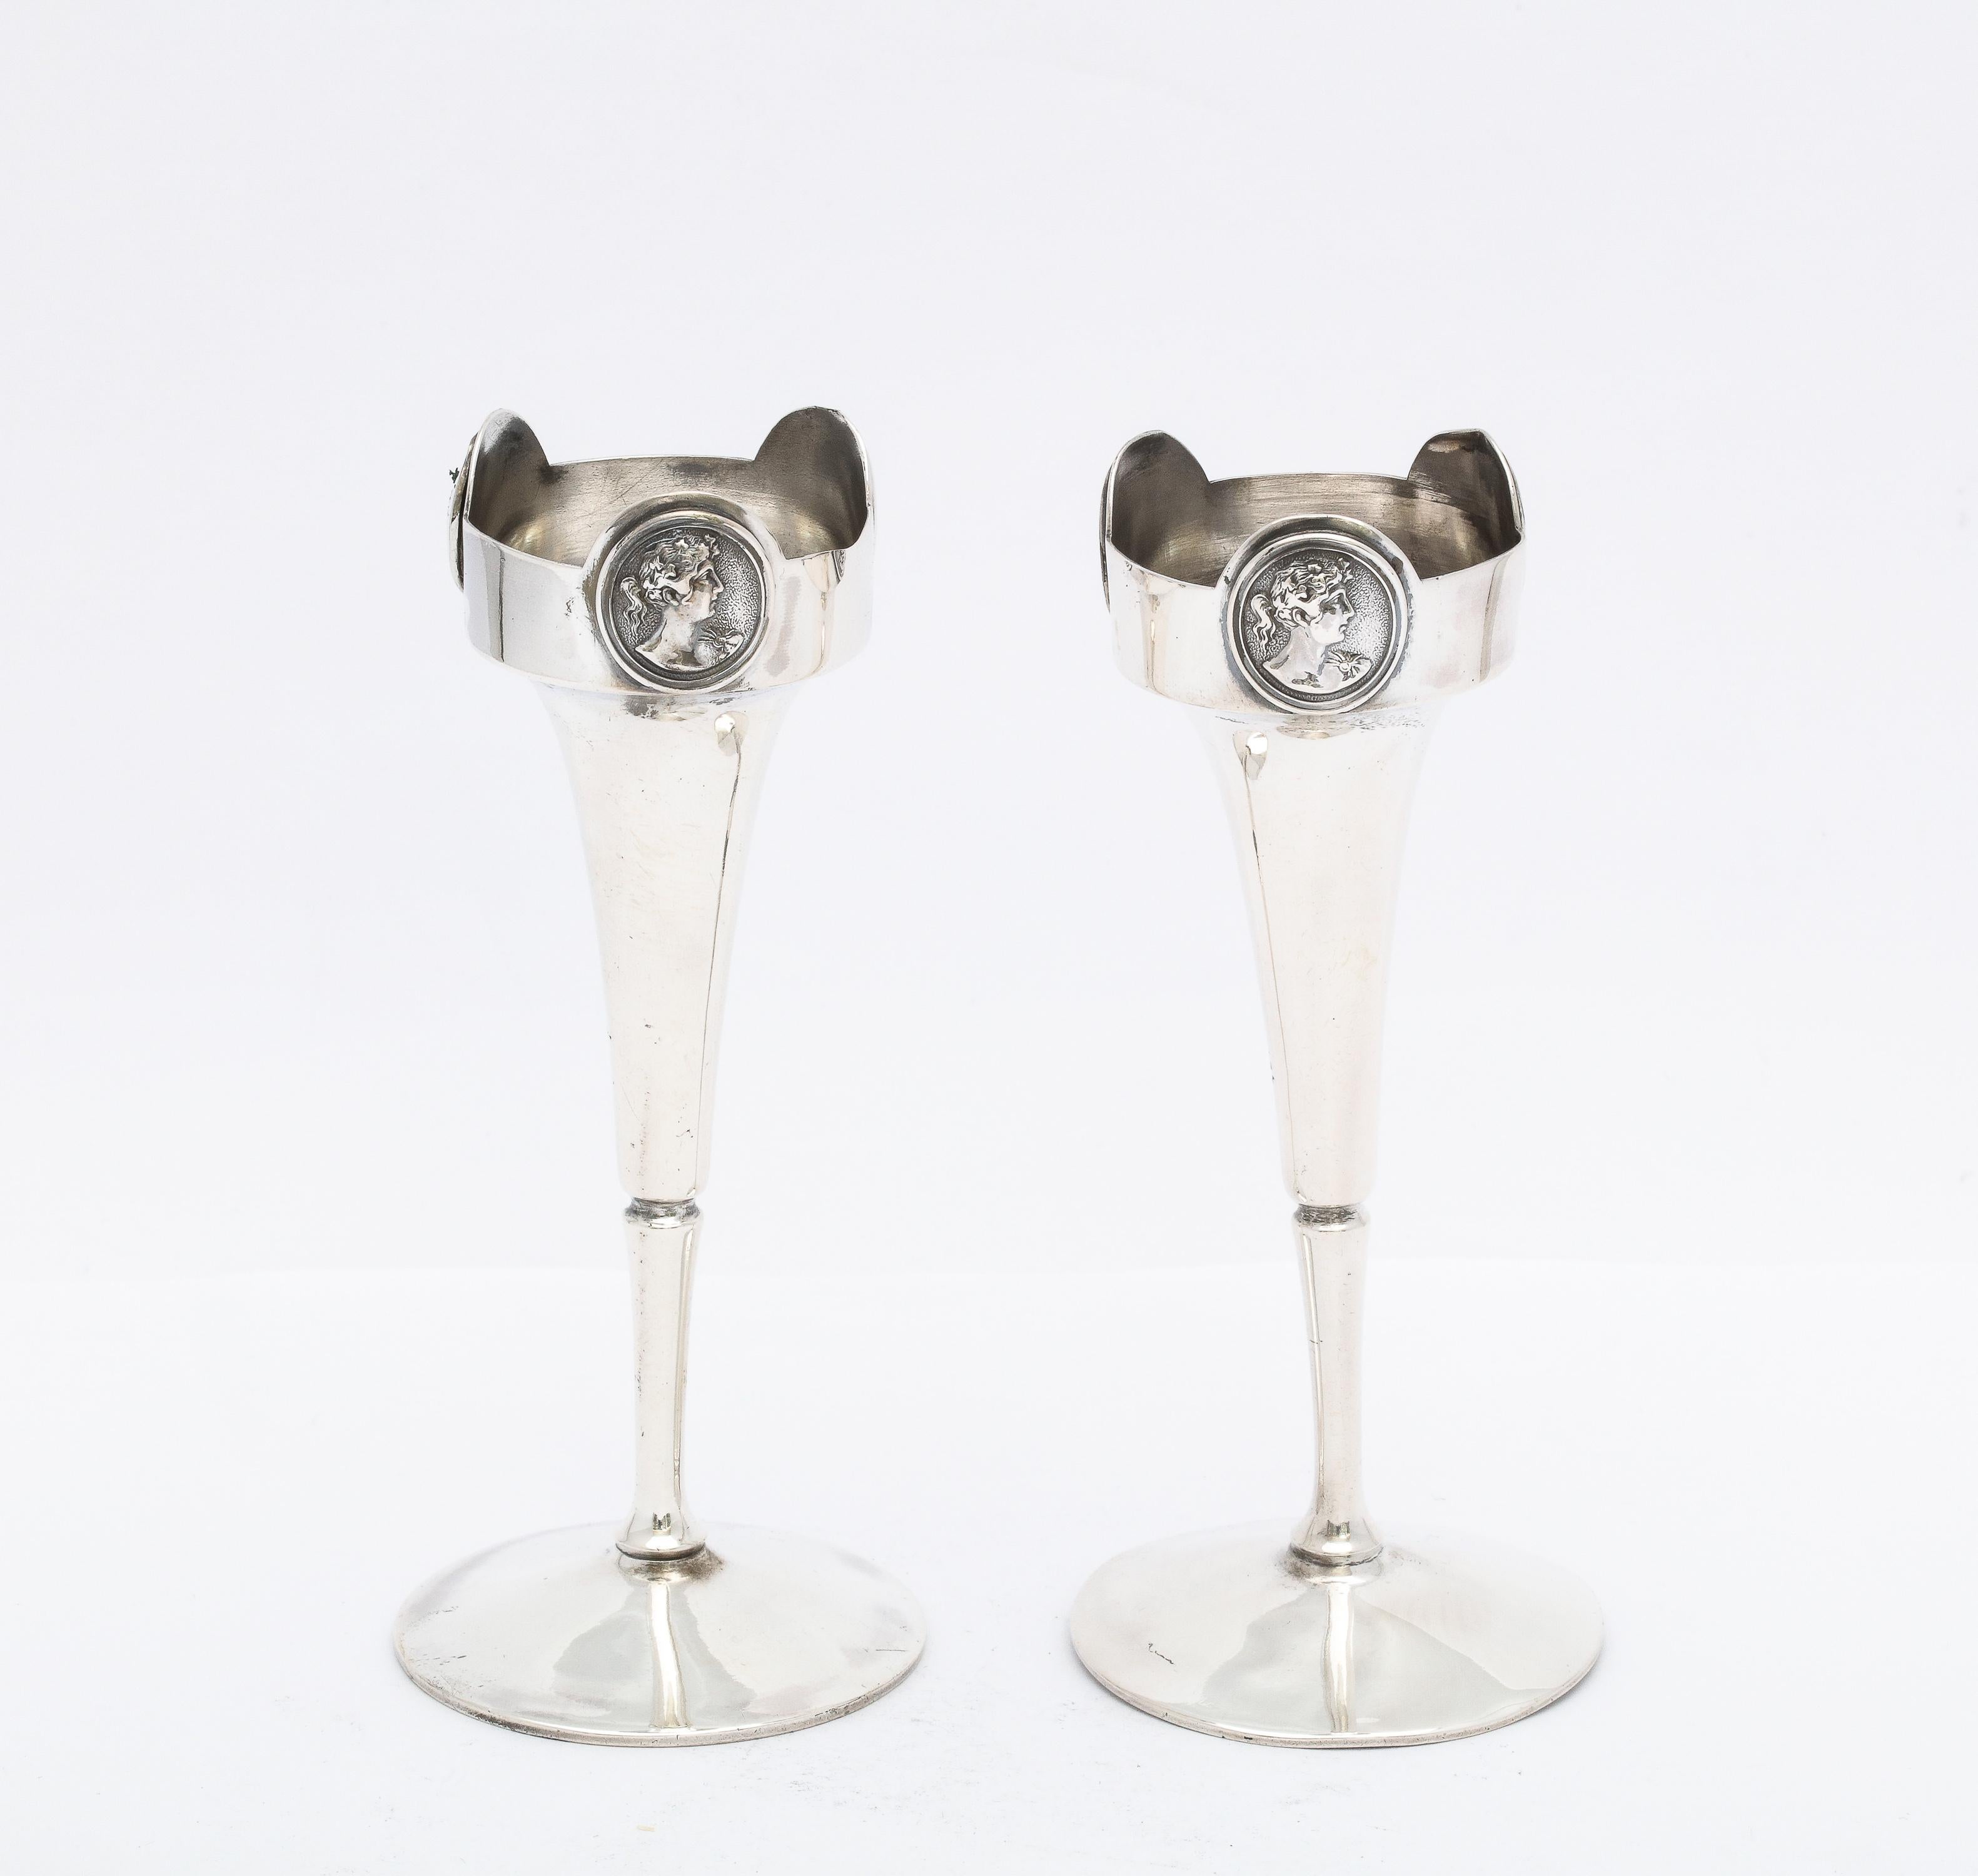 Pair of American Coin Silver (.900), Neoclassical-style Medallion bud vases, Gorham Mfg. Co., Providence, Rhode Island, Ca. 1875. Each vase has 3 lovely Neoclassical medallions around the rim of its opening. Each bud vase measures 4 1/2 inches high